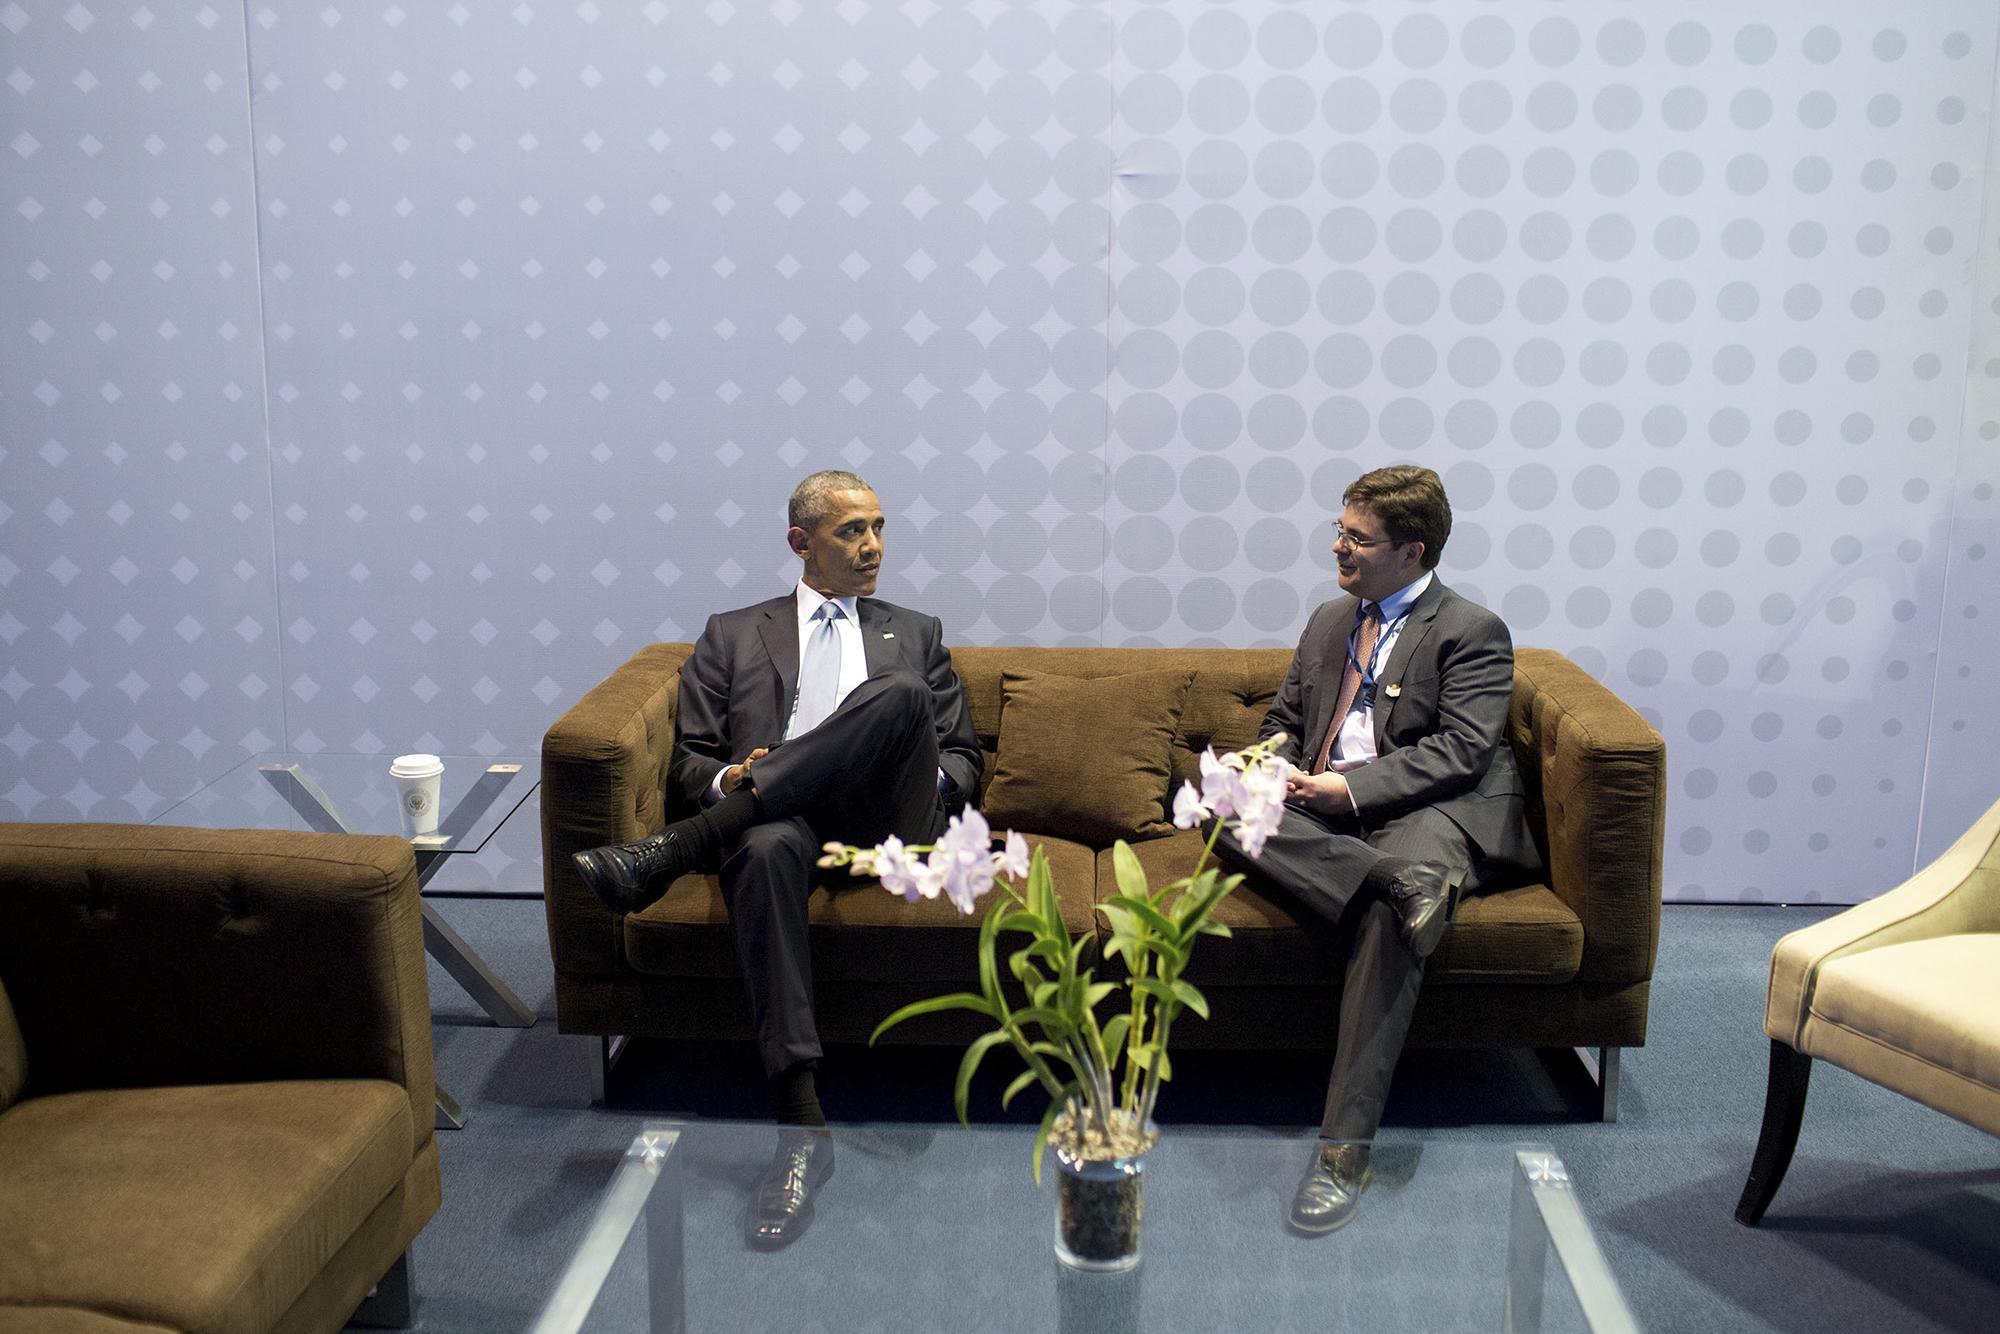 The President talks backstage with Ricardo Zuniga, the National Security Council